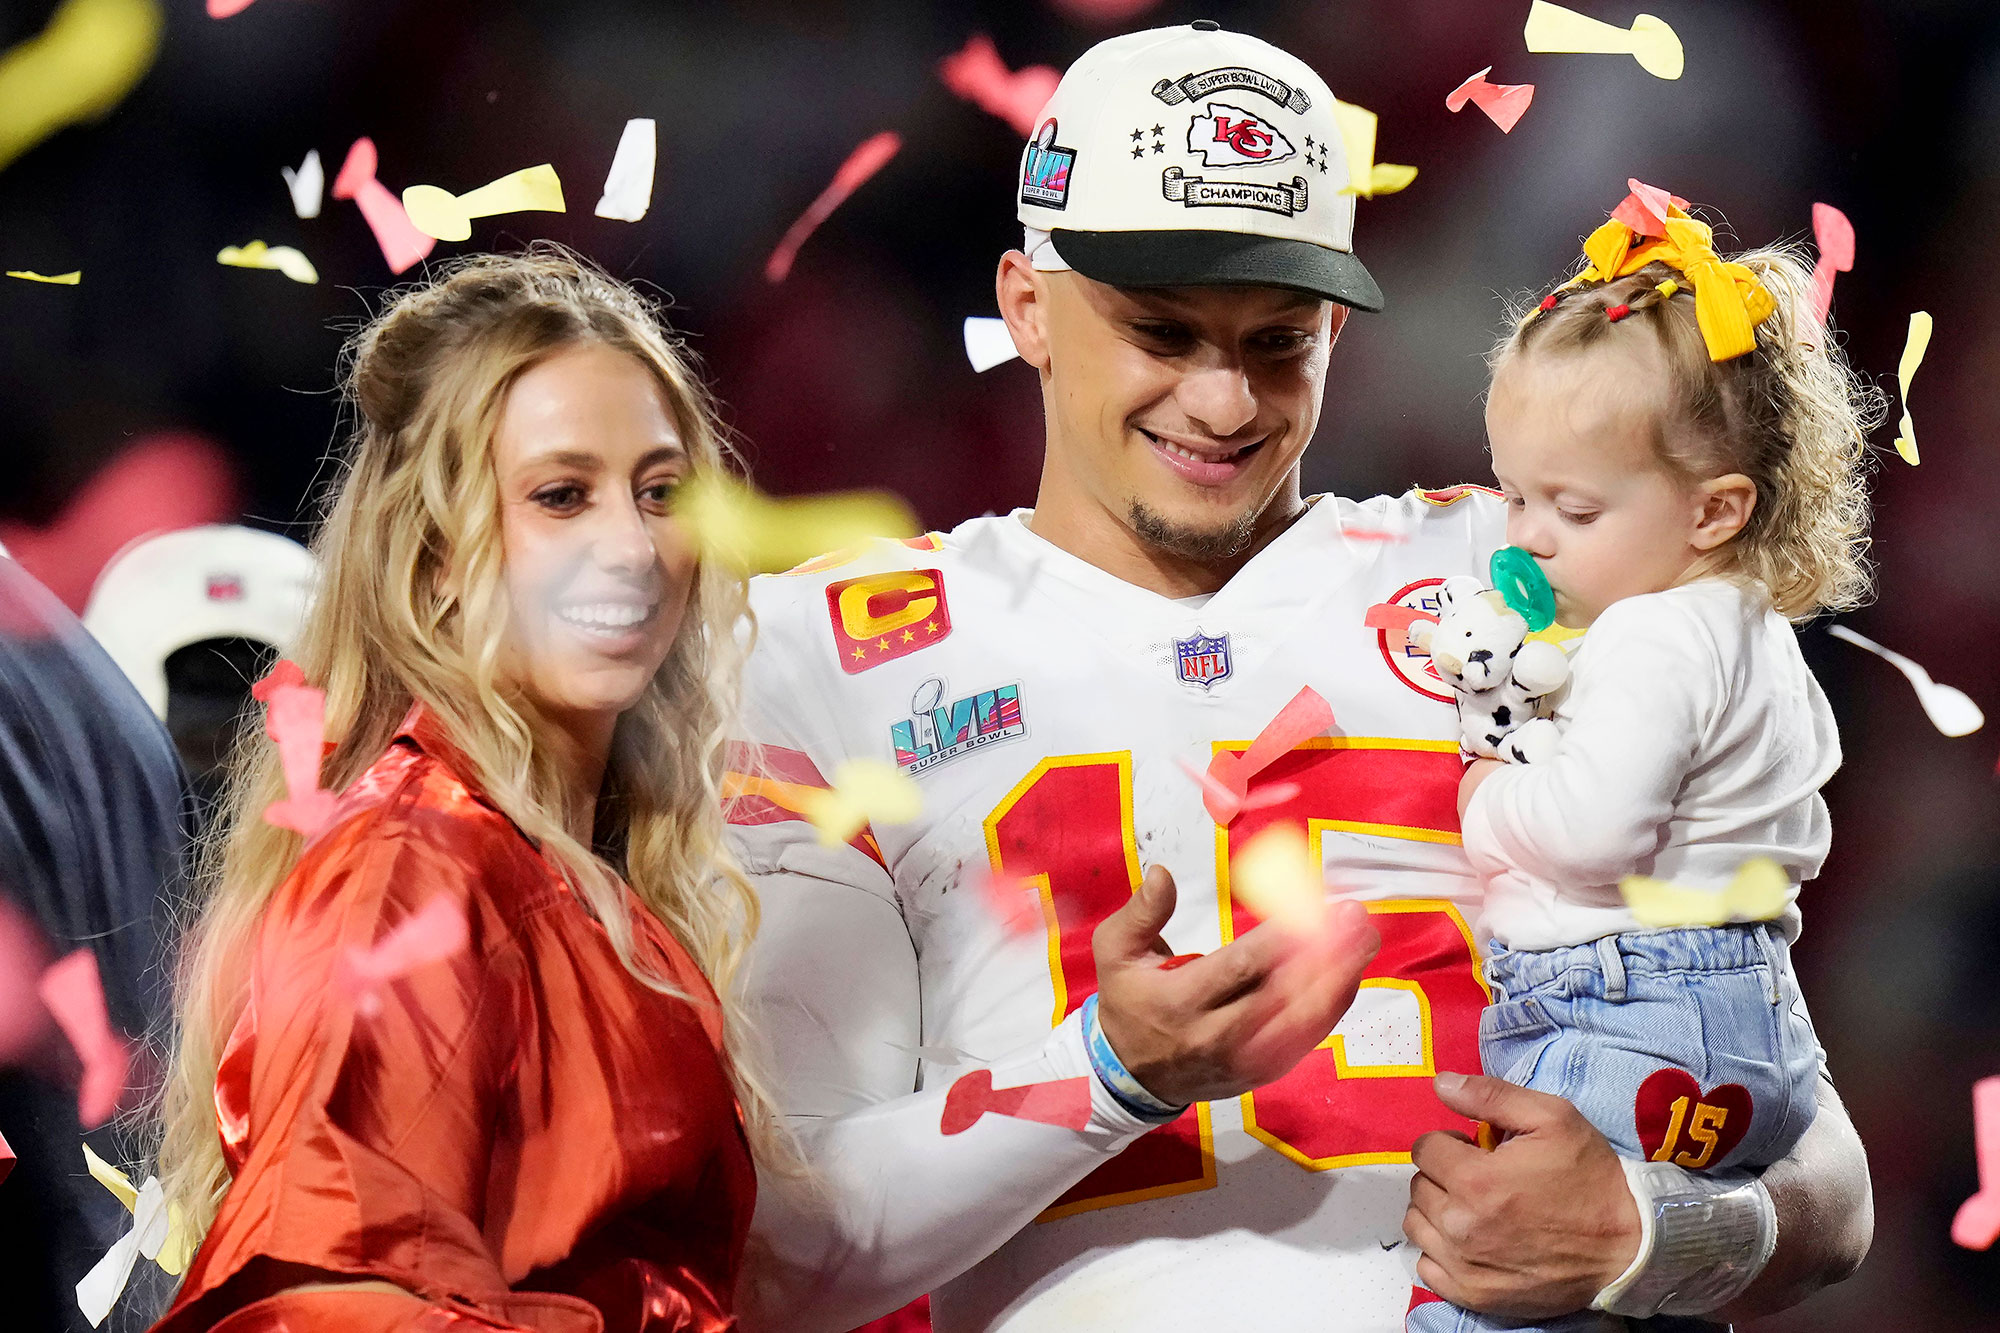 Who Are Patrick Mahomes's Parents? Meet the QB's Mom and Dad